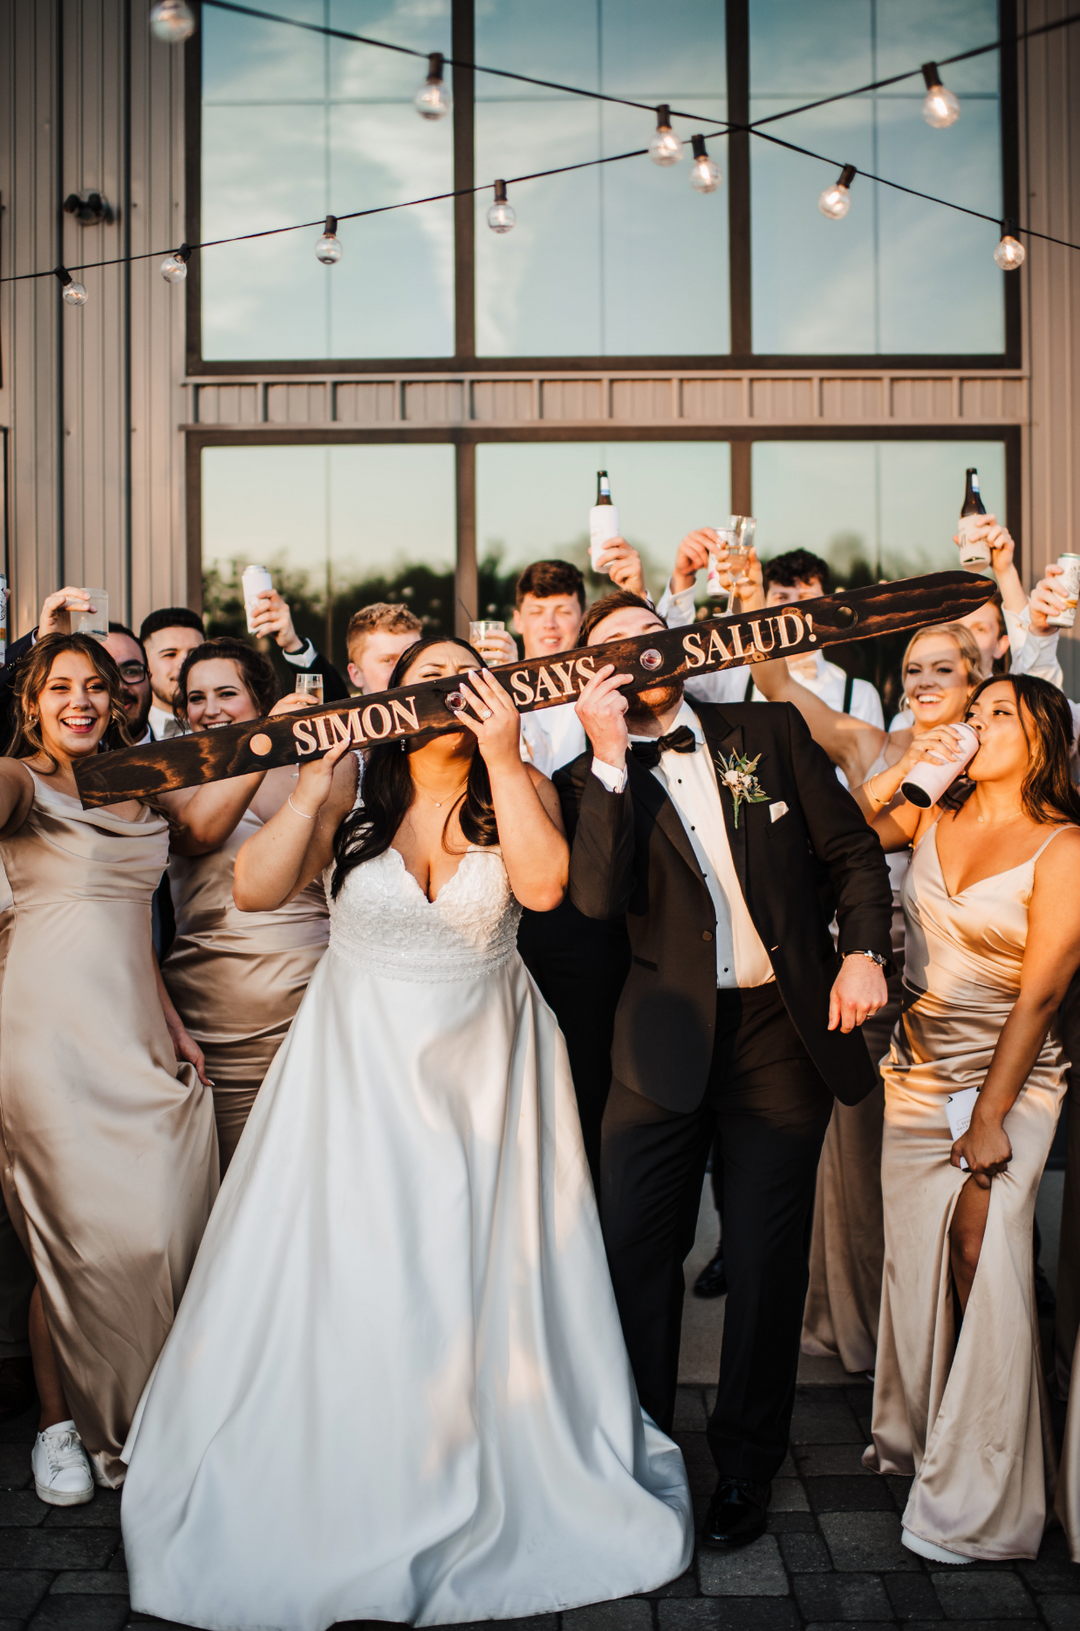 Our Custom Wedding Shotskis are ordered for weddings across the country! As seen on The Knot. 